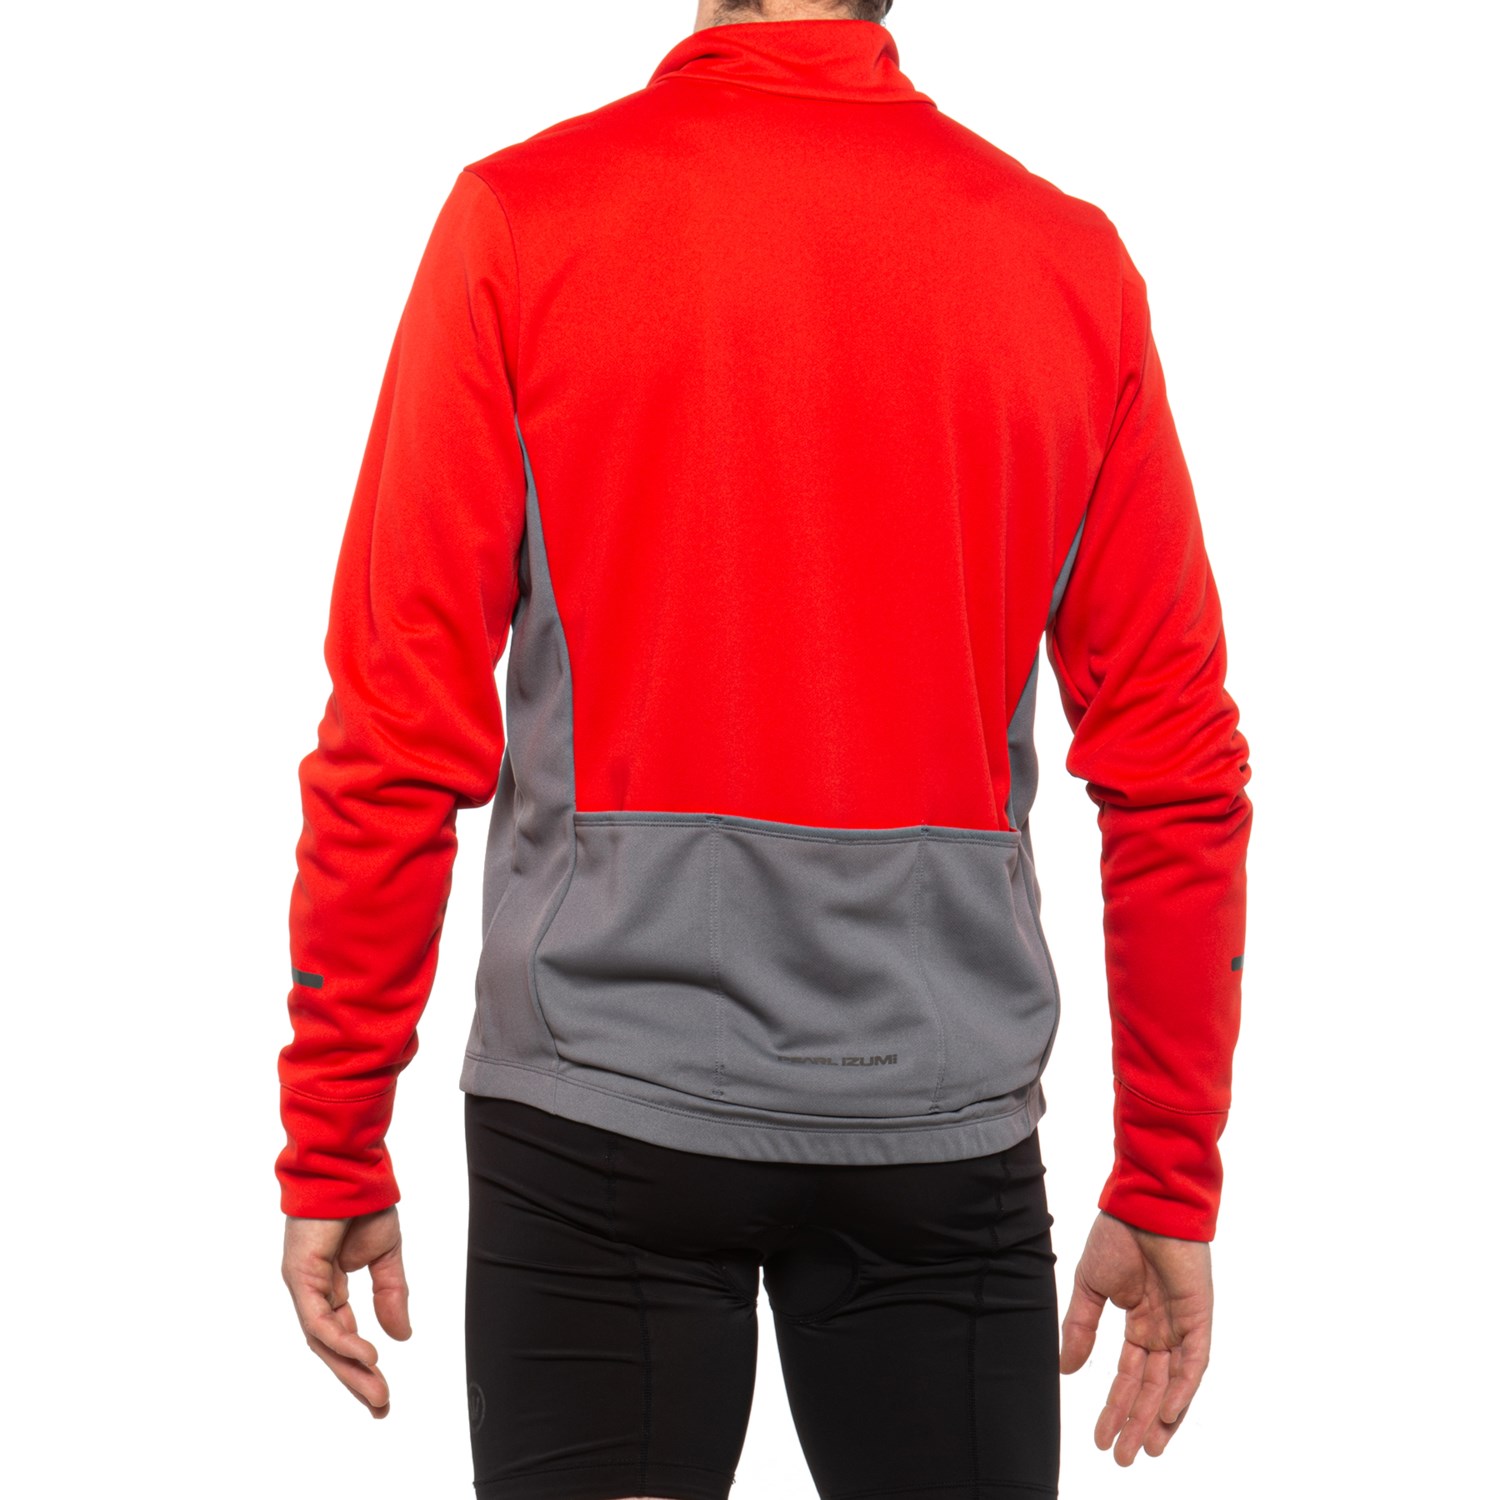 pearl izumi quest thermal cycling jersey